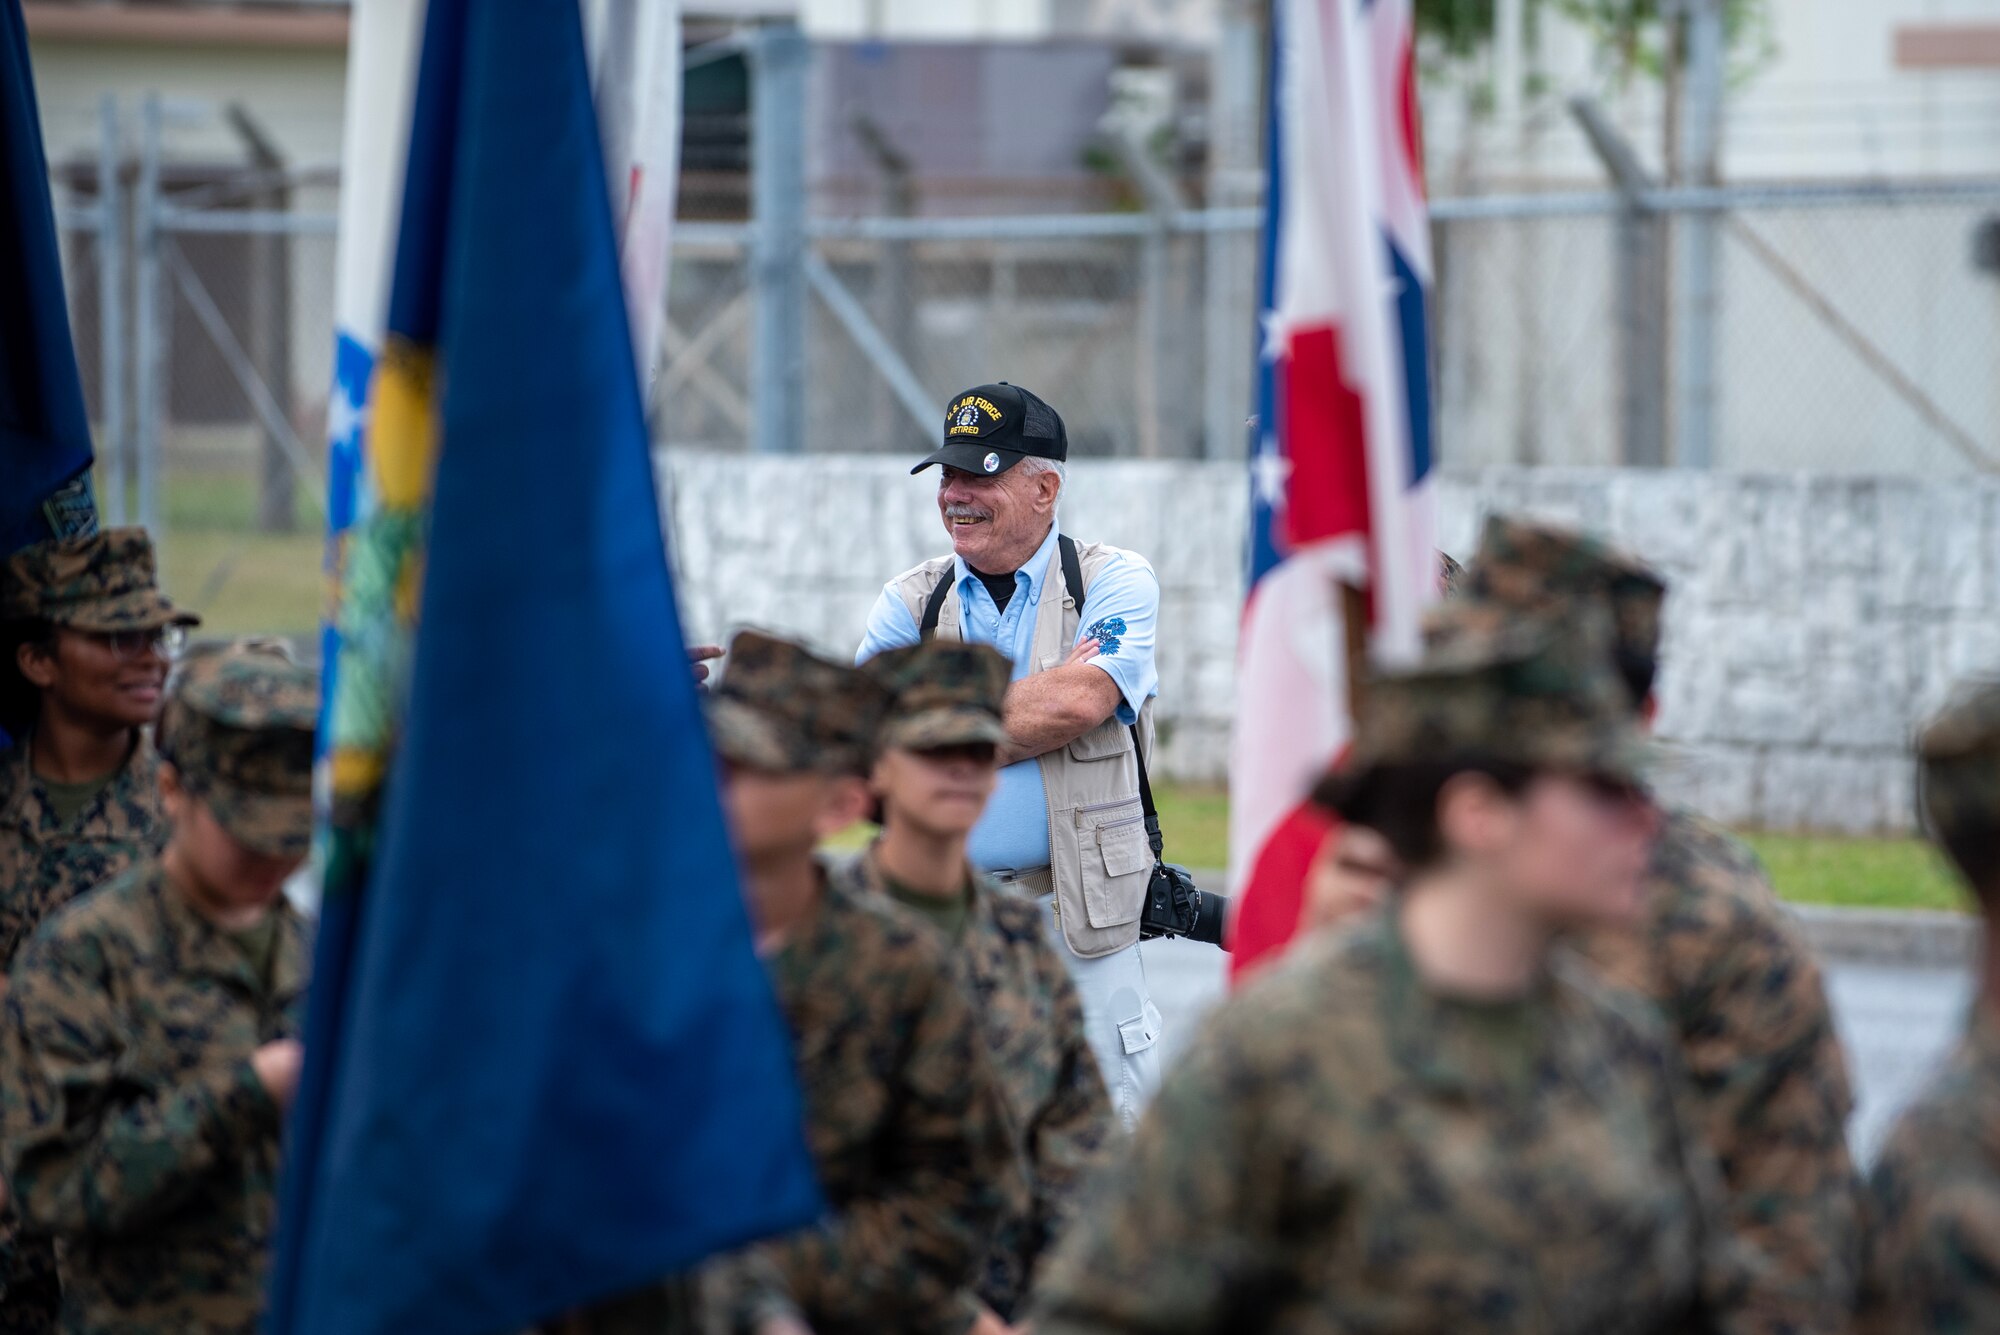 A retired instructor watches as members from Kubasaki Marine Corps JROTC program march by as a part of Kadena Air Base's Veterans Day Parade